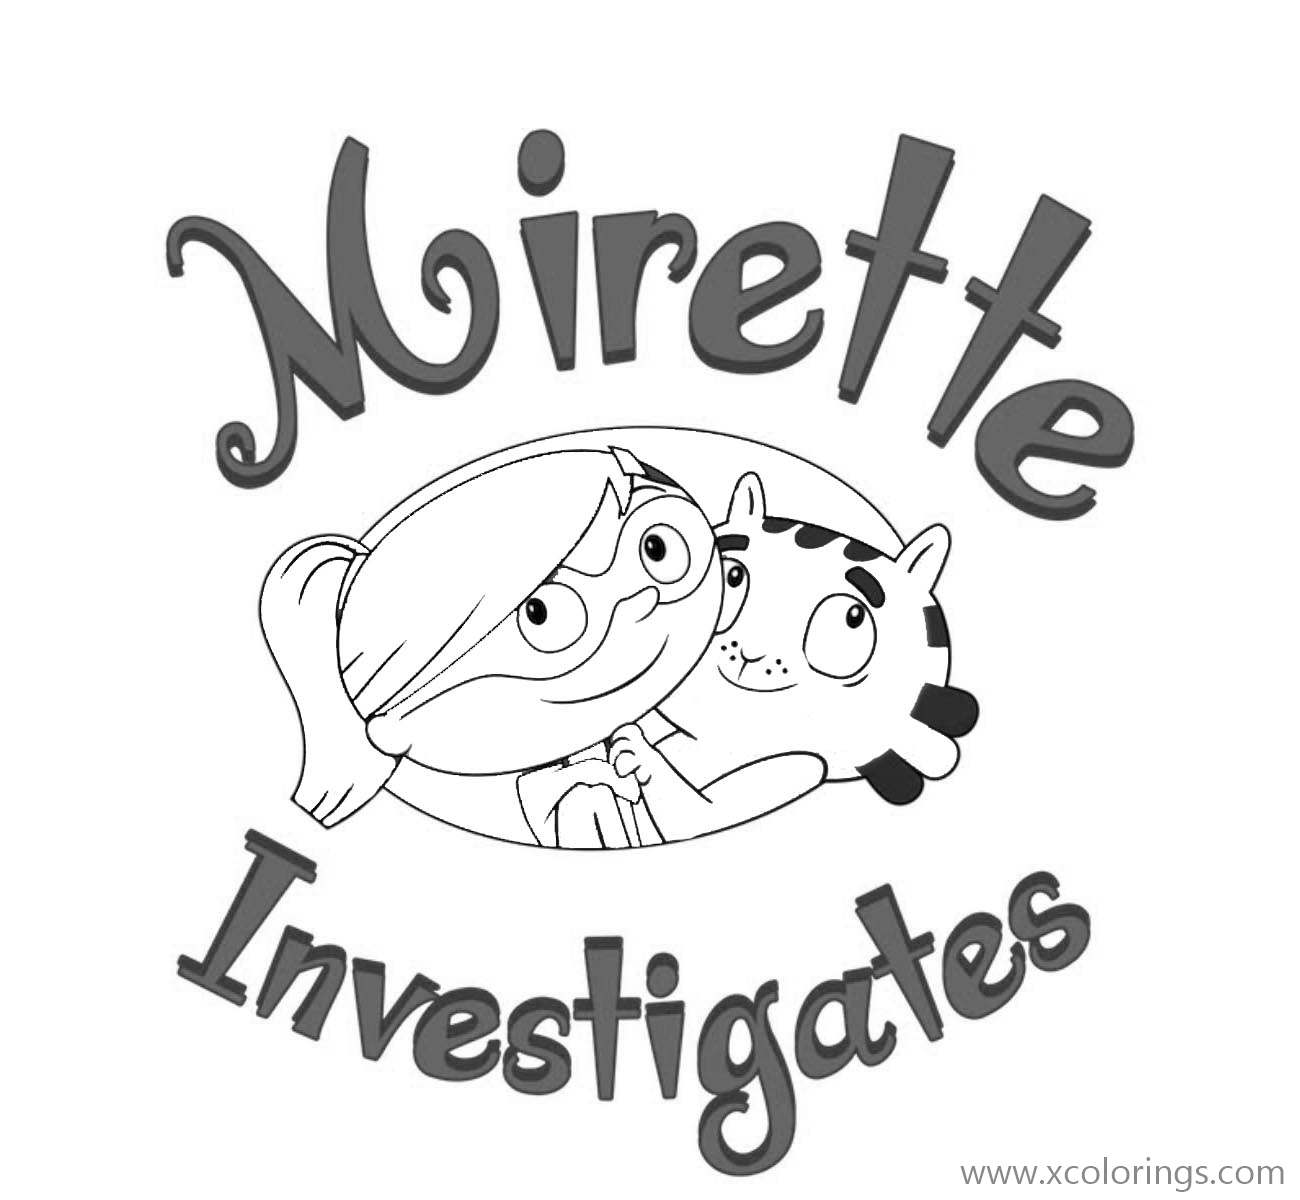 Free Mirette Investigates Coloring Pages Logo printable